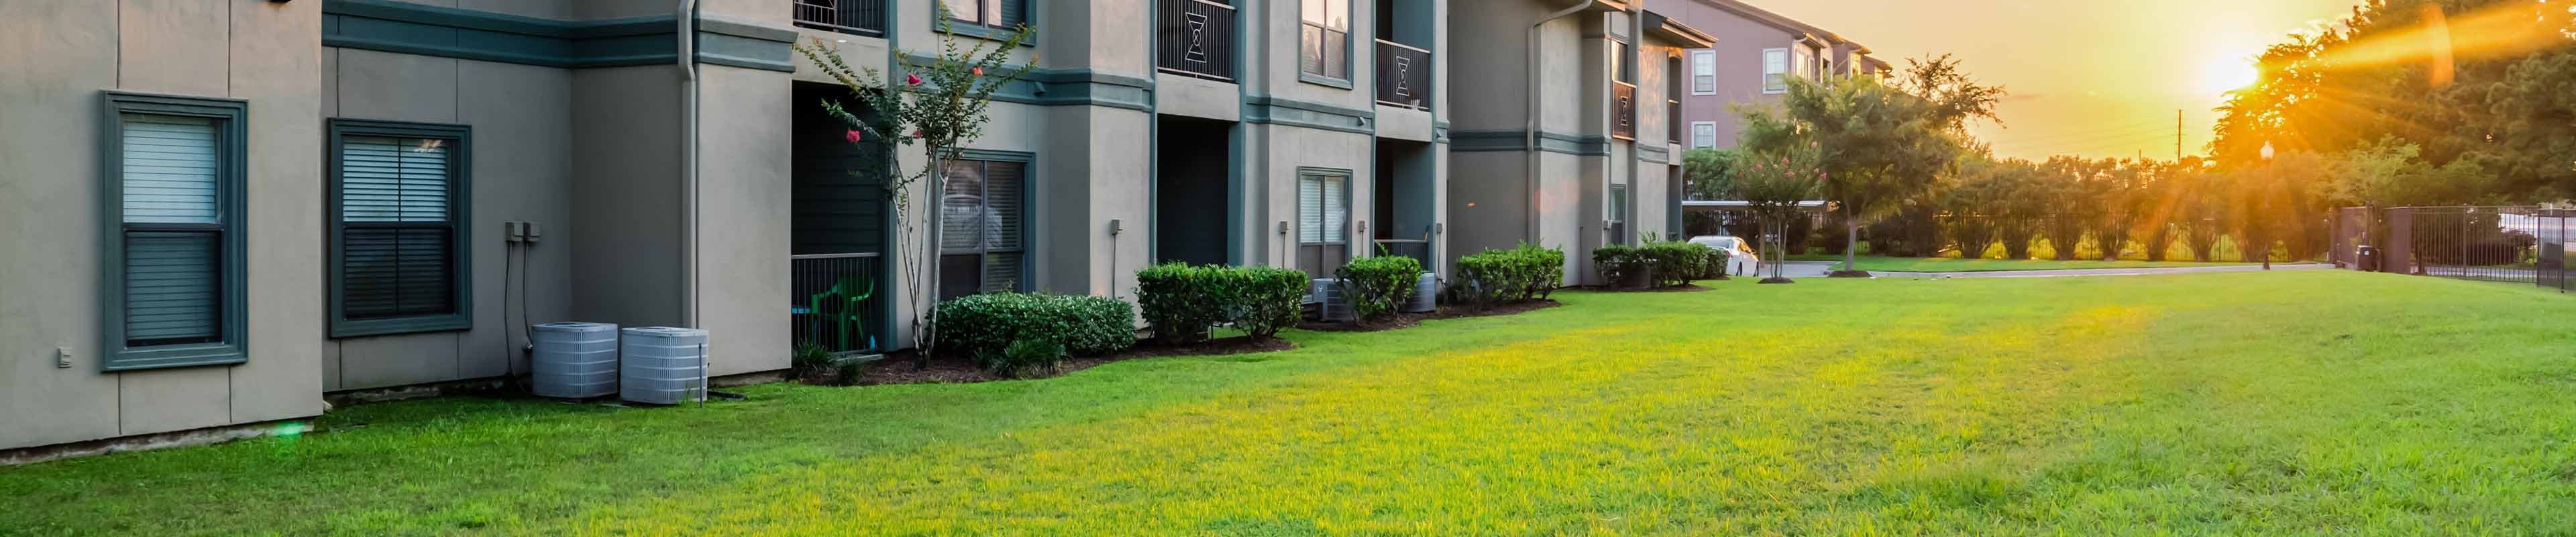 Row of condos and common area lawn